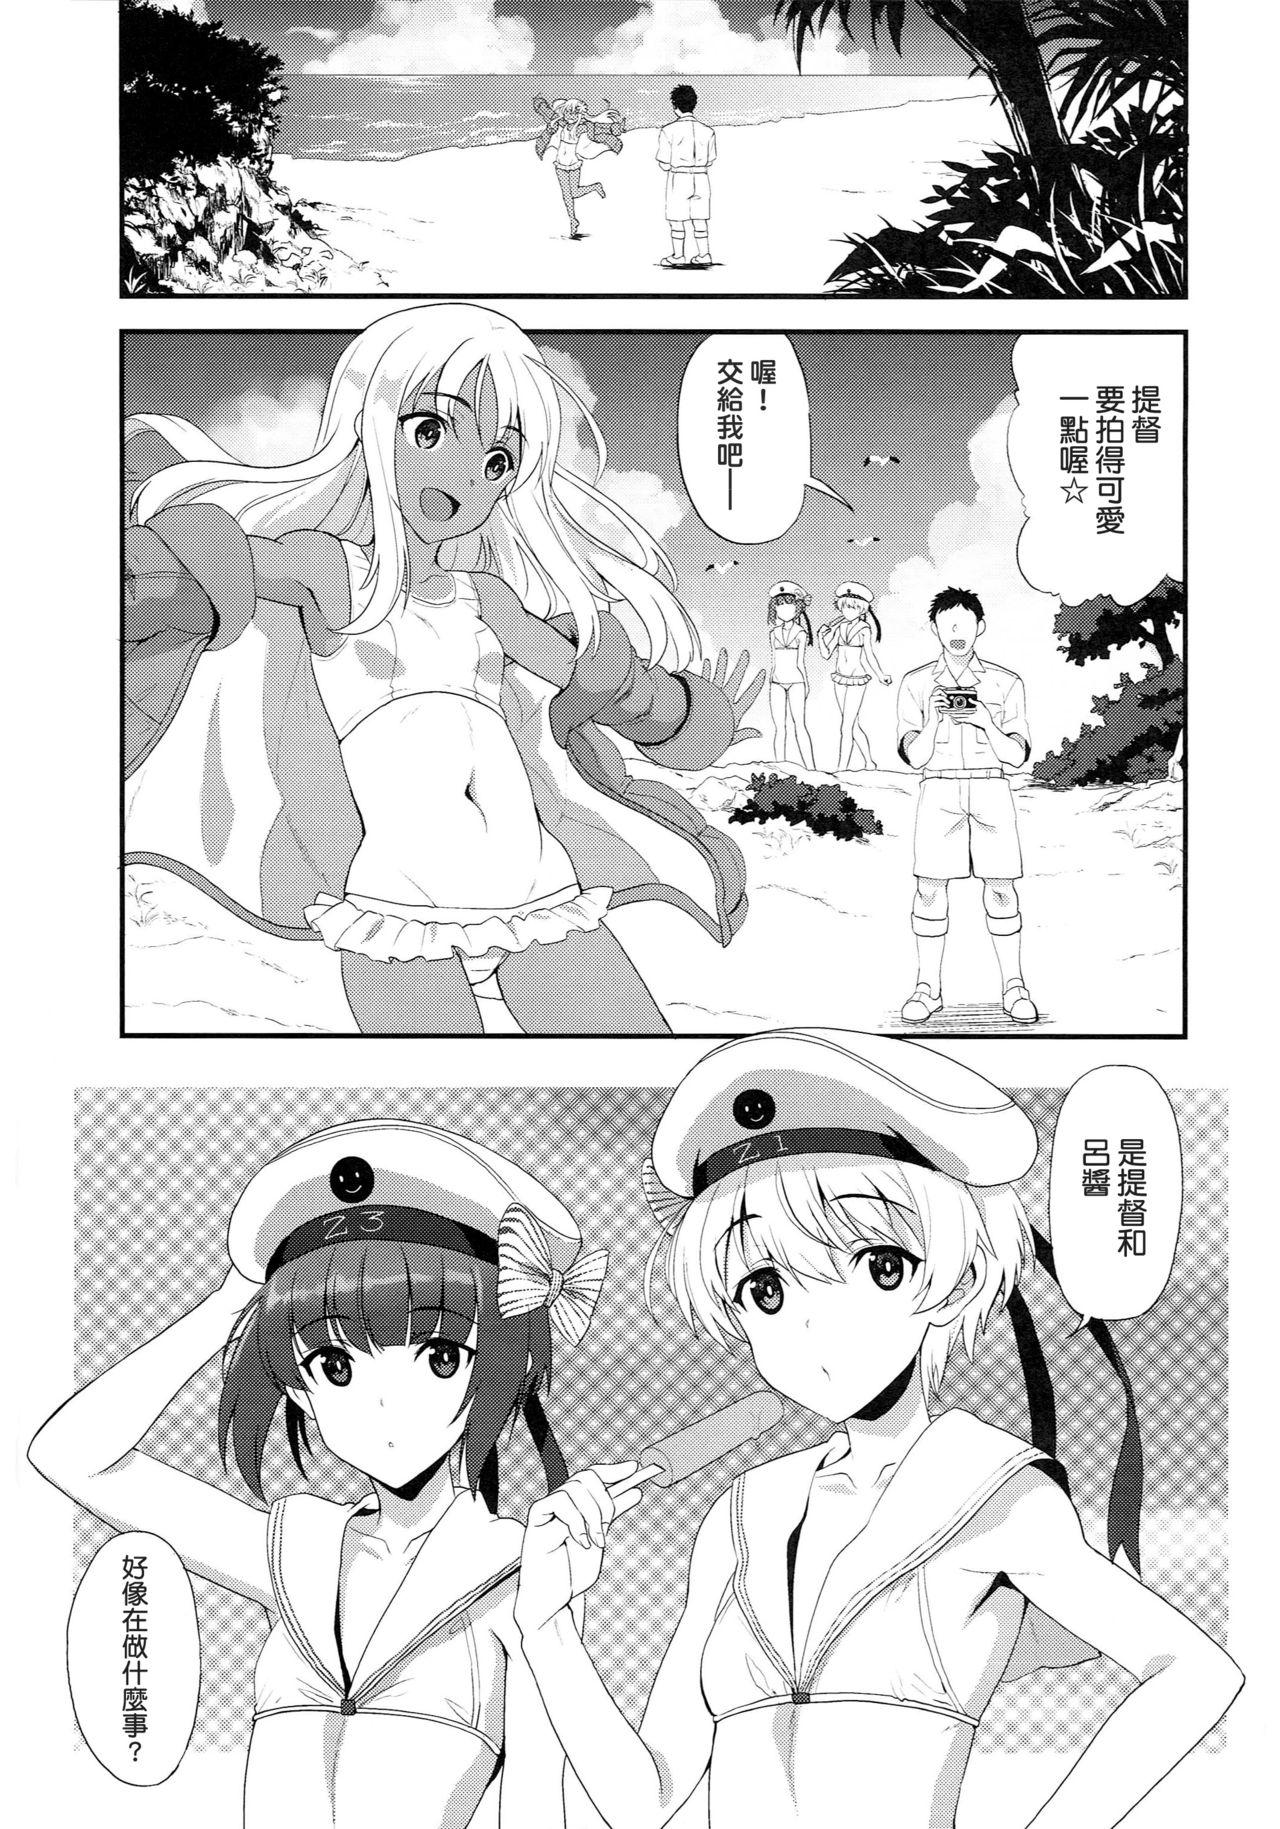 Relax Apfelschorle - Kantai collection Strap On - Page 3